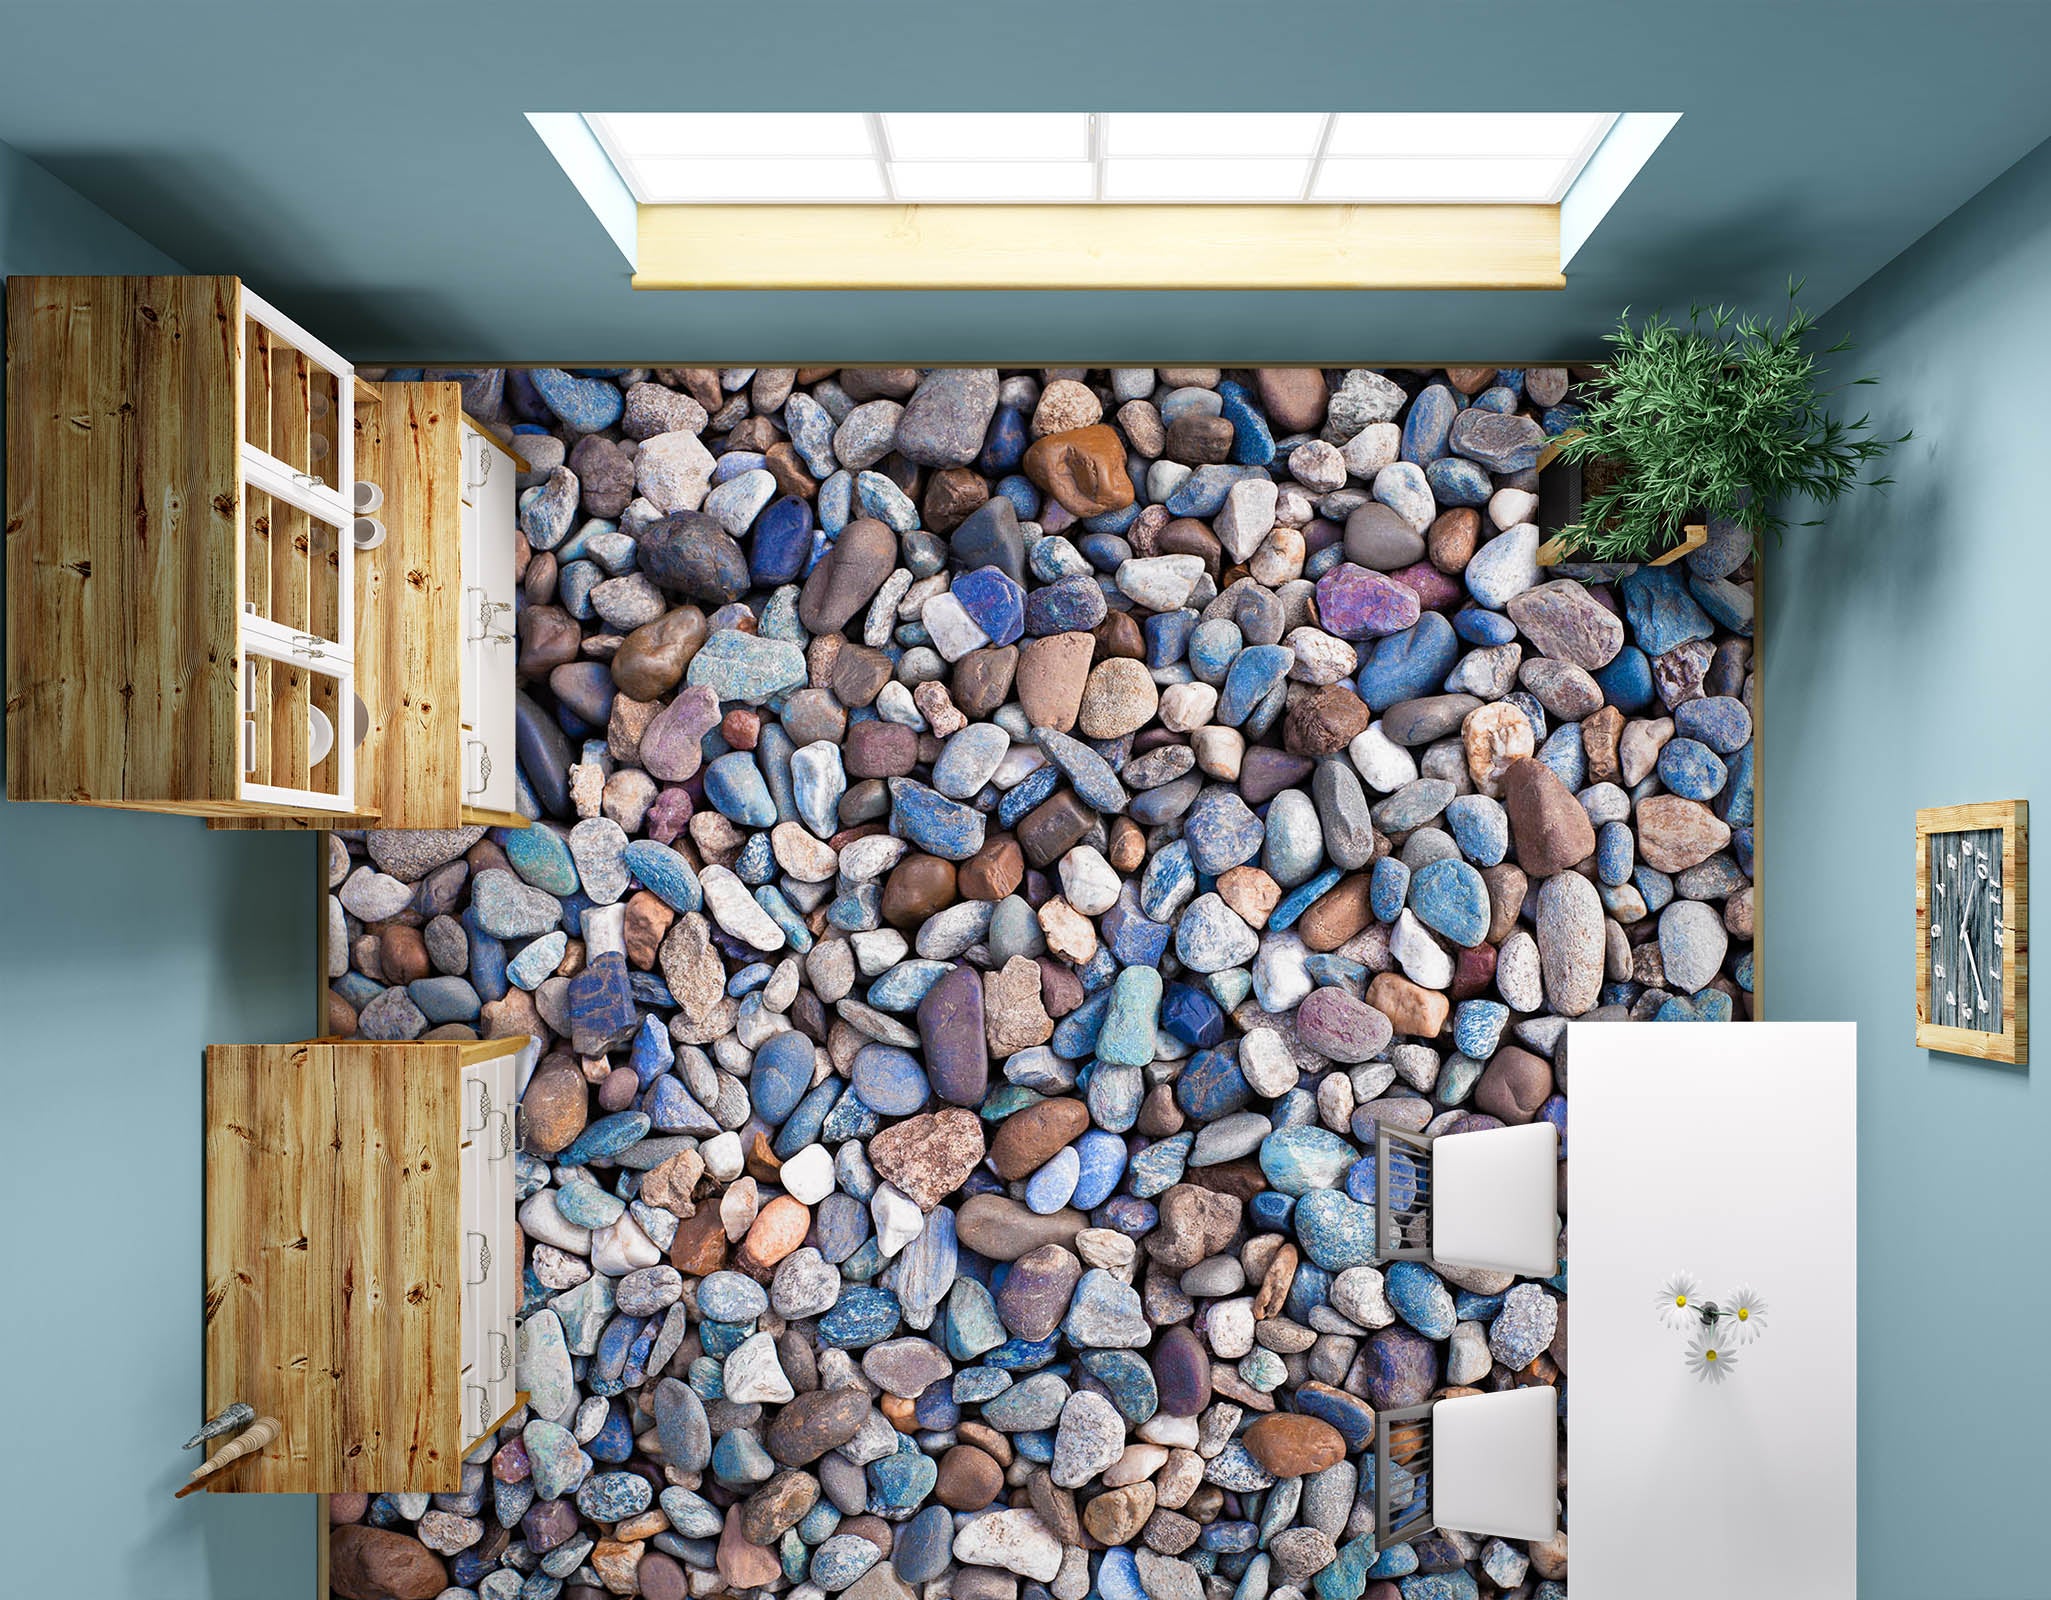 3D Cute Colored Little Stones 969 Floor Mural  Wallpaper Murals Self-Adhesive Removable Print Epoxy